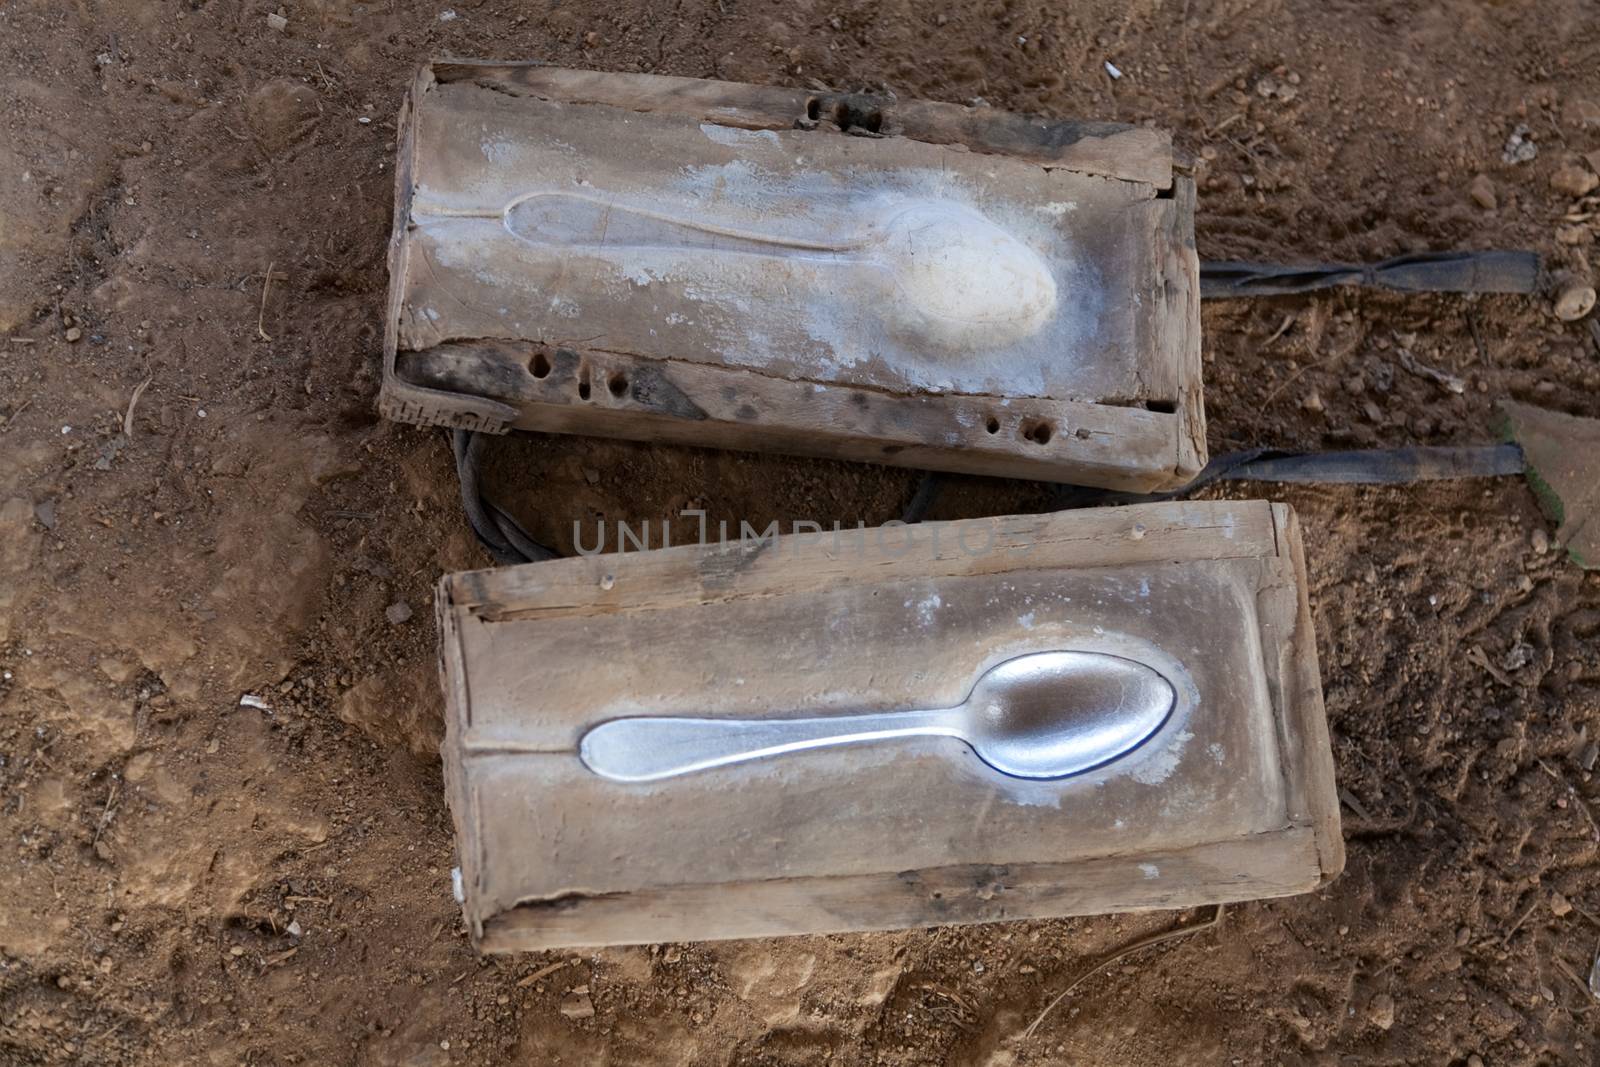 Ban Napia near Phonsavan Laos a village where people makes spoons from bombs leftover from Vietnam war. Examples of moulds used to make spoons from molten aluminium.High quality photo